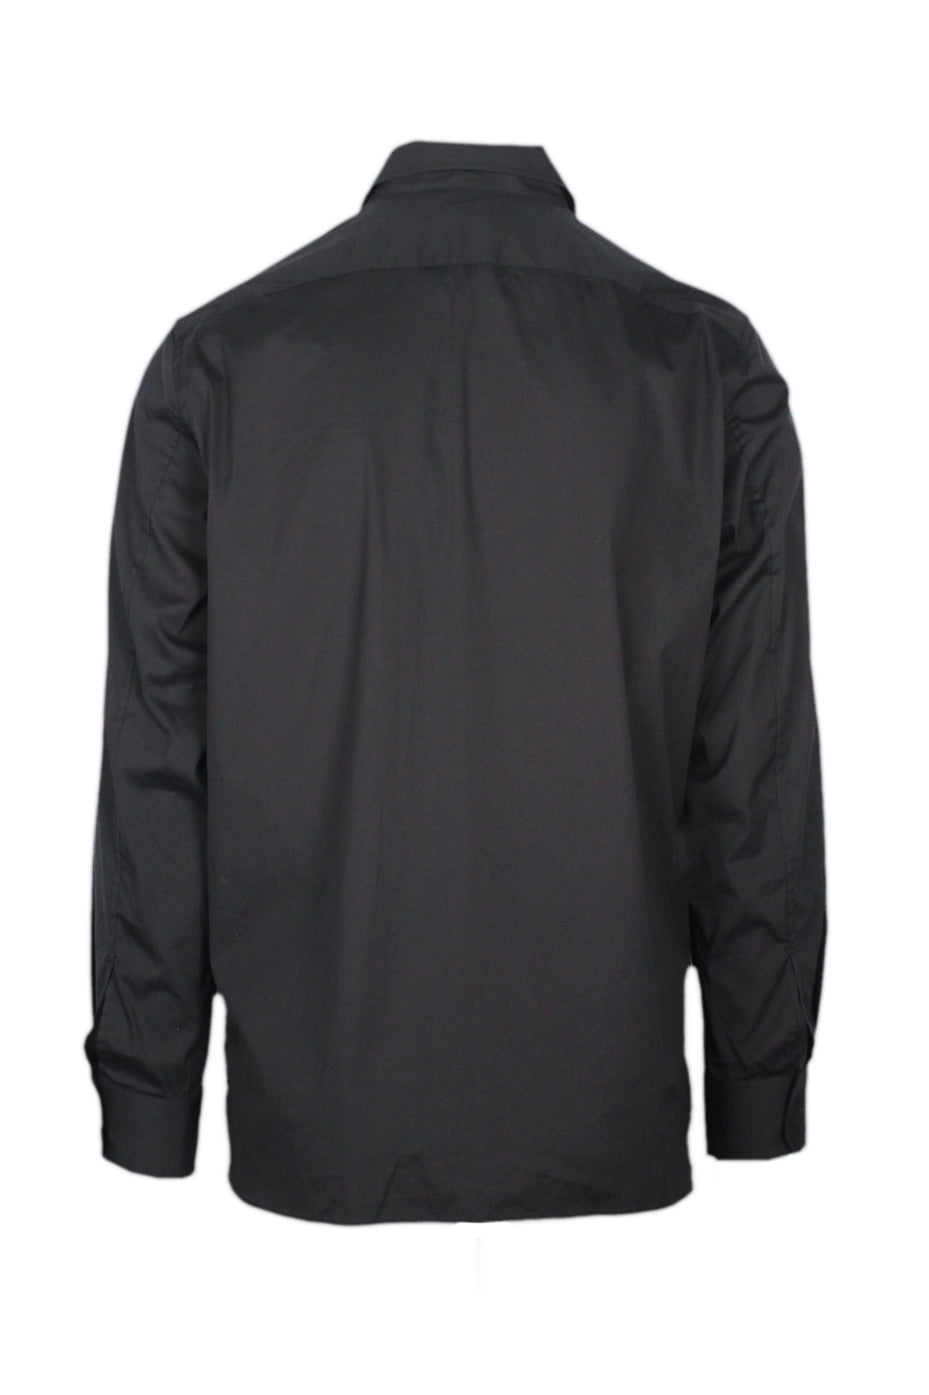 rear view with tonal stitching throughout shirt.